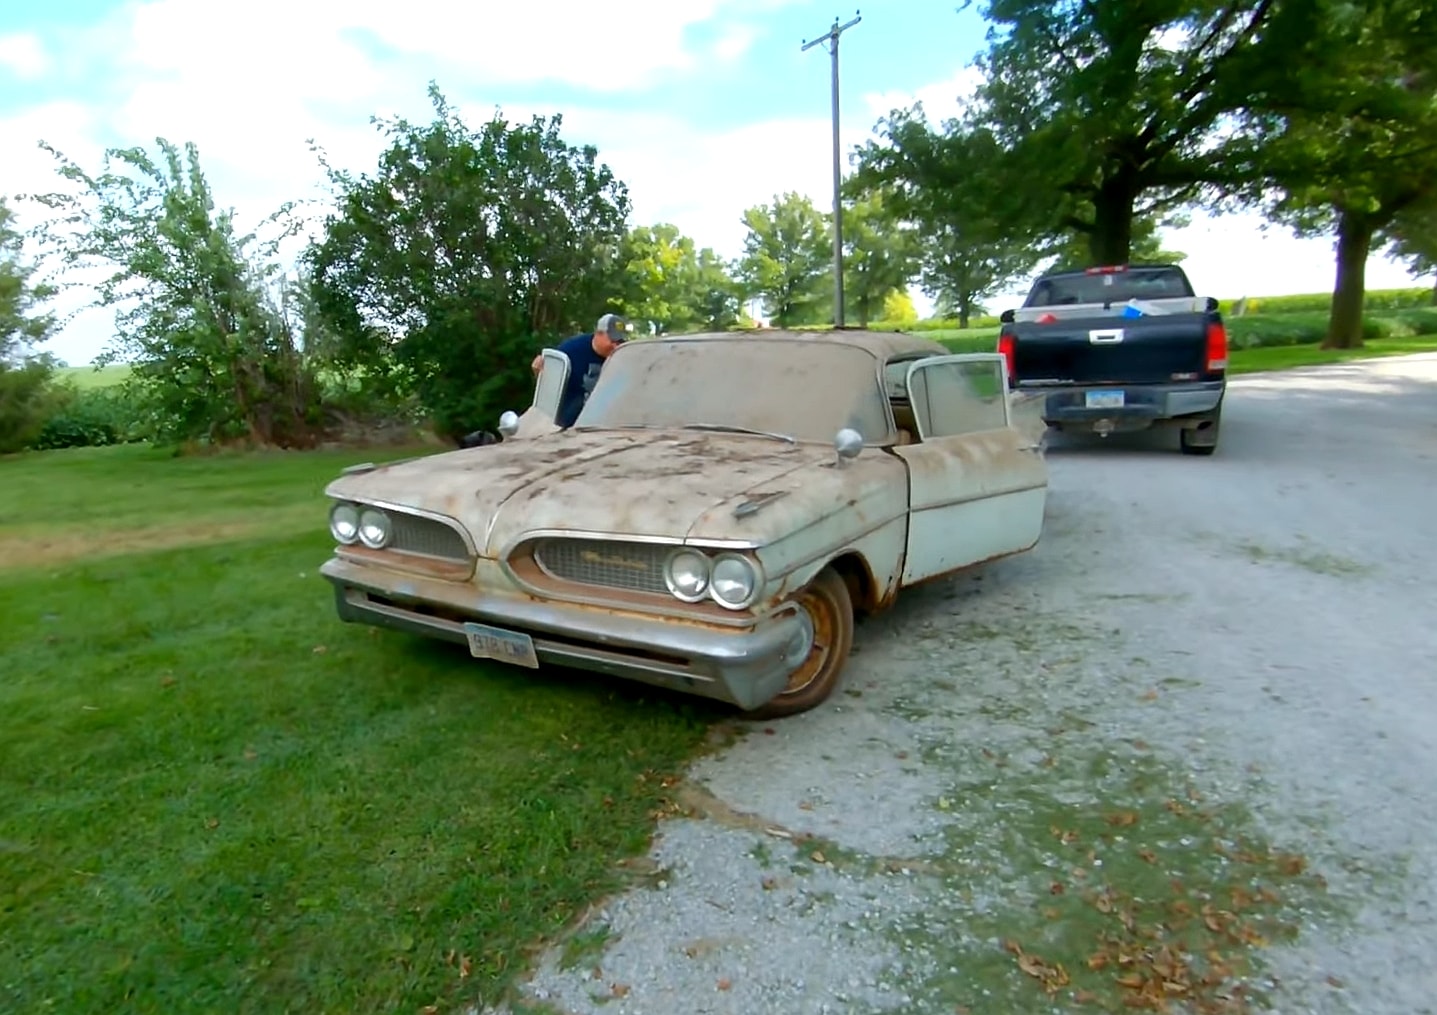 1959 Pontiac Catalina Comes Out of the Barn After 22 Years, Gets First Wash...